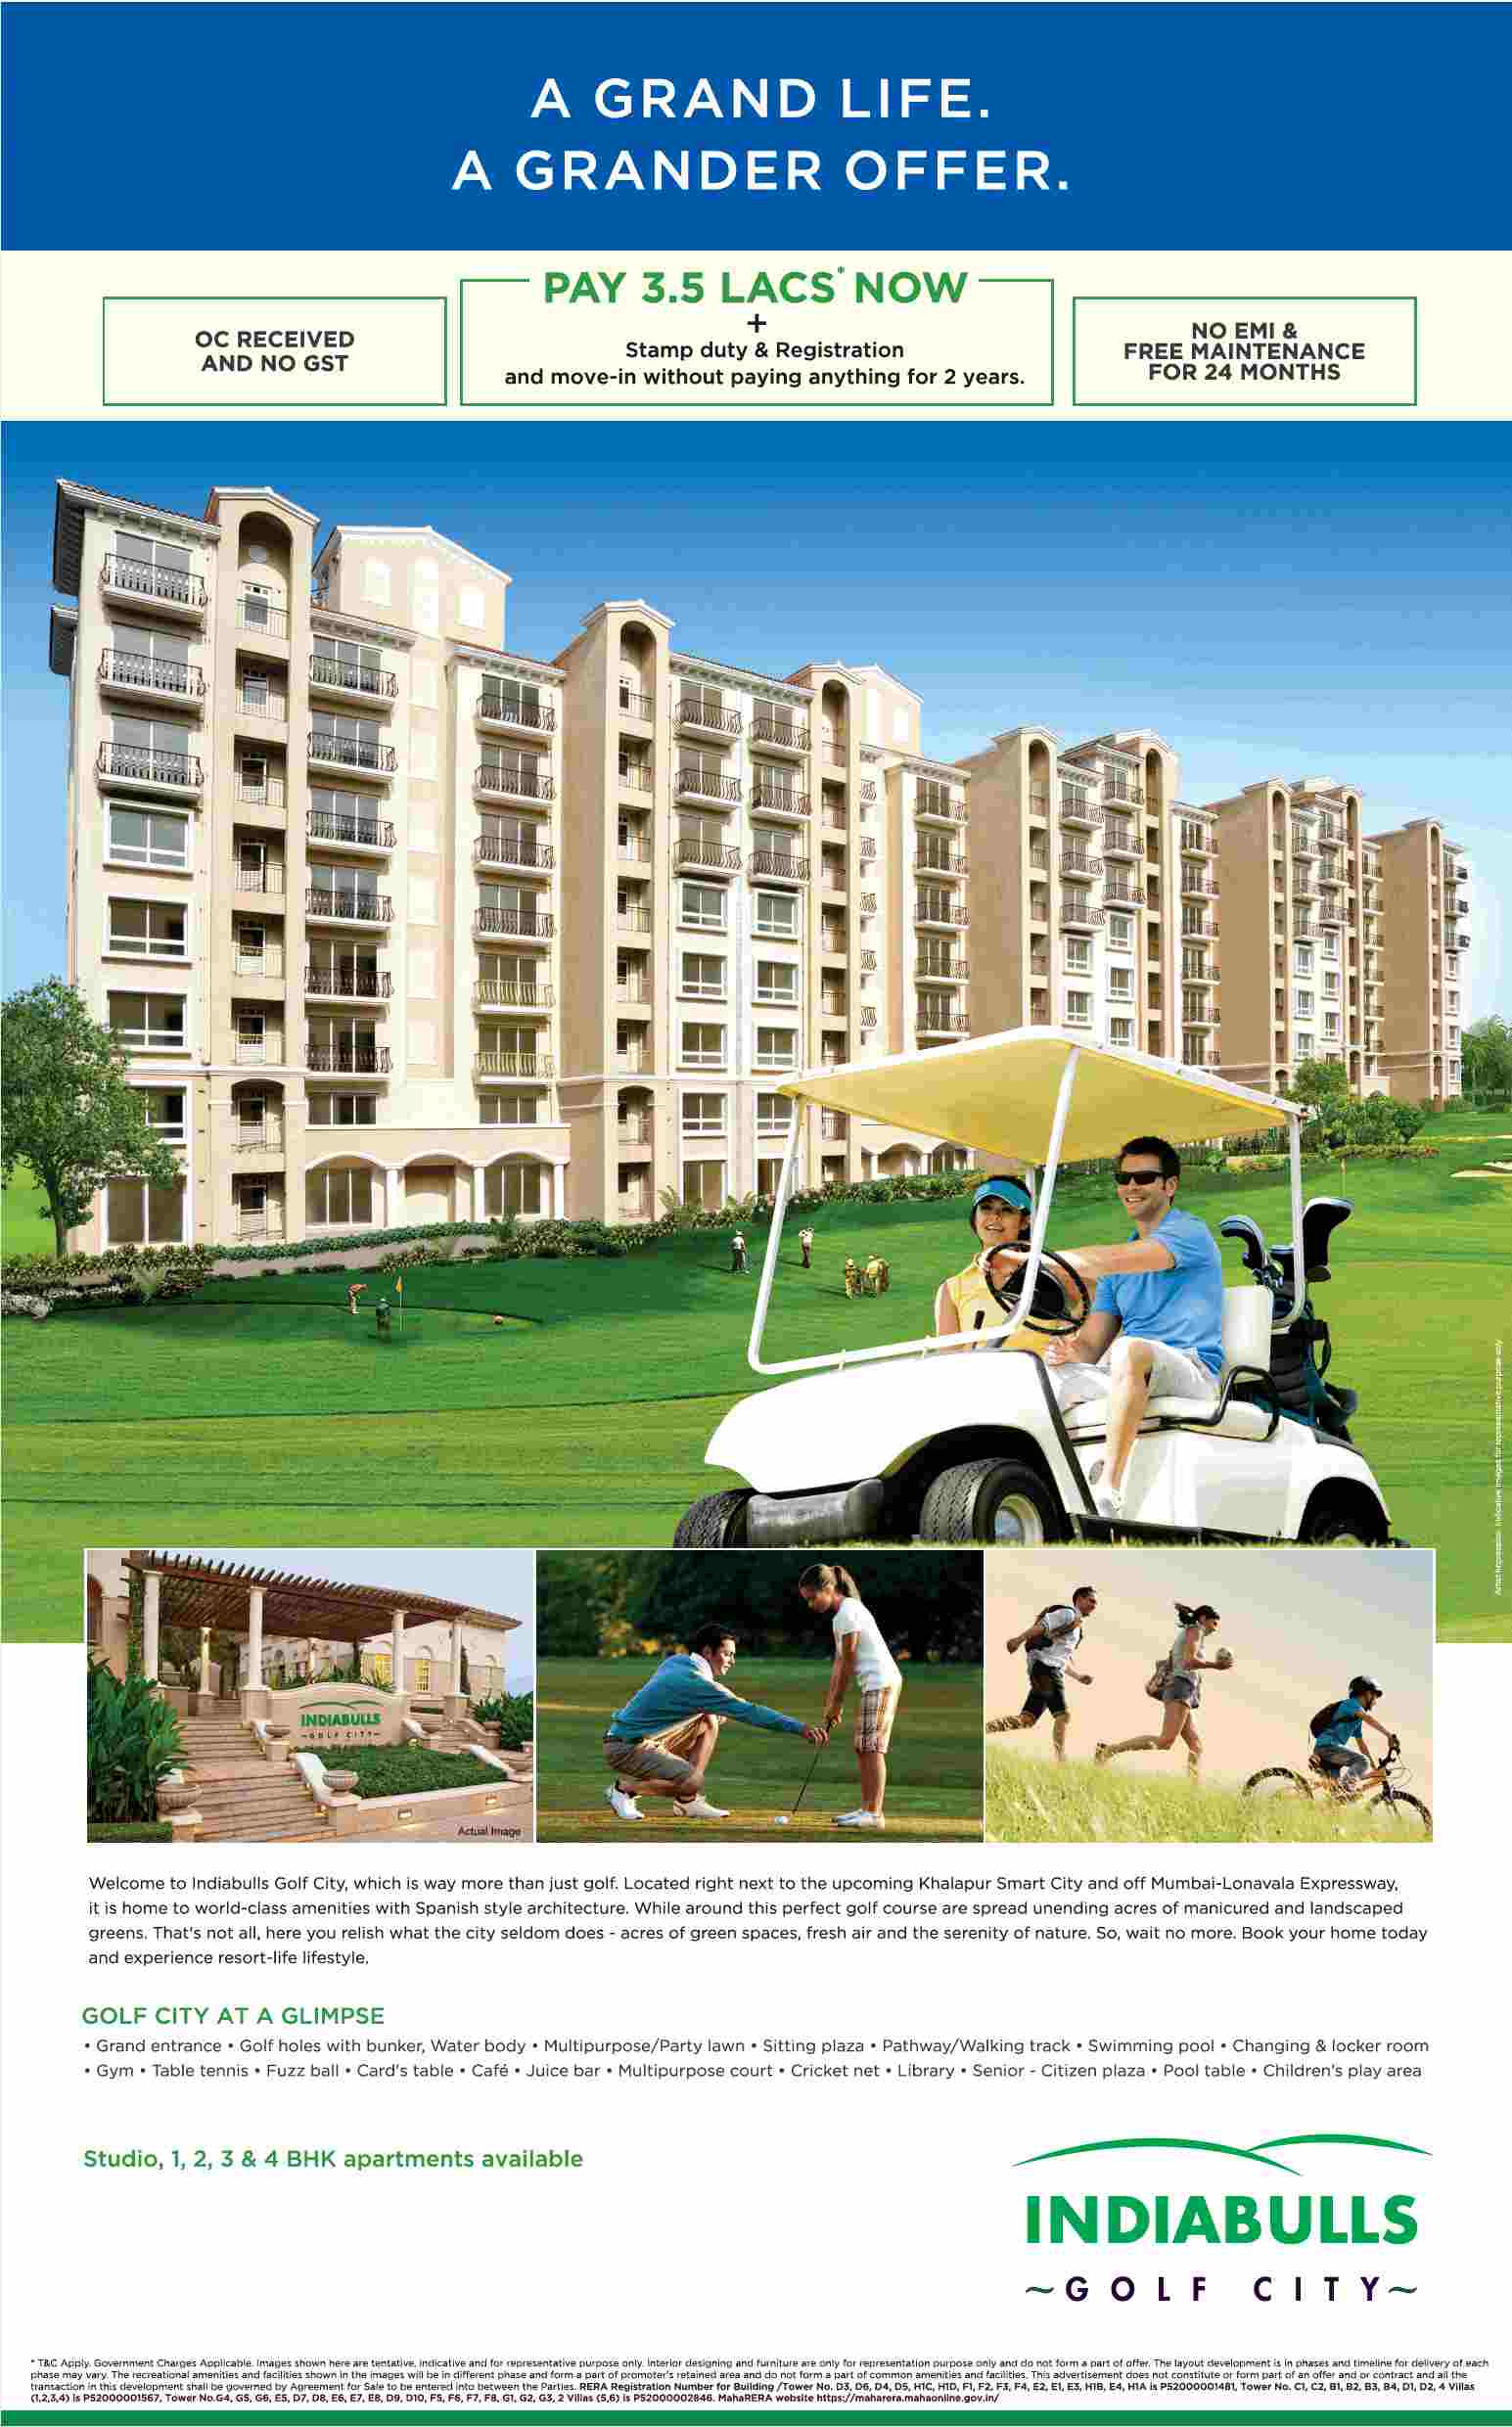 Pay 3.5 Lacs now + stamp duty & registration and move-in at Indiabulls Golf City in Mumbai Update